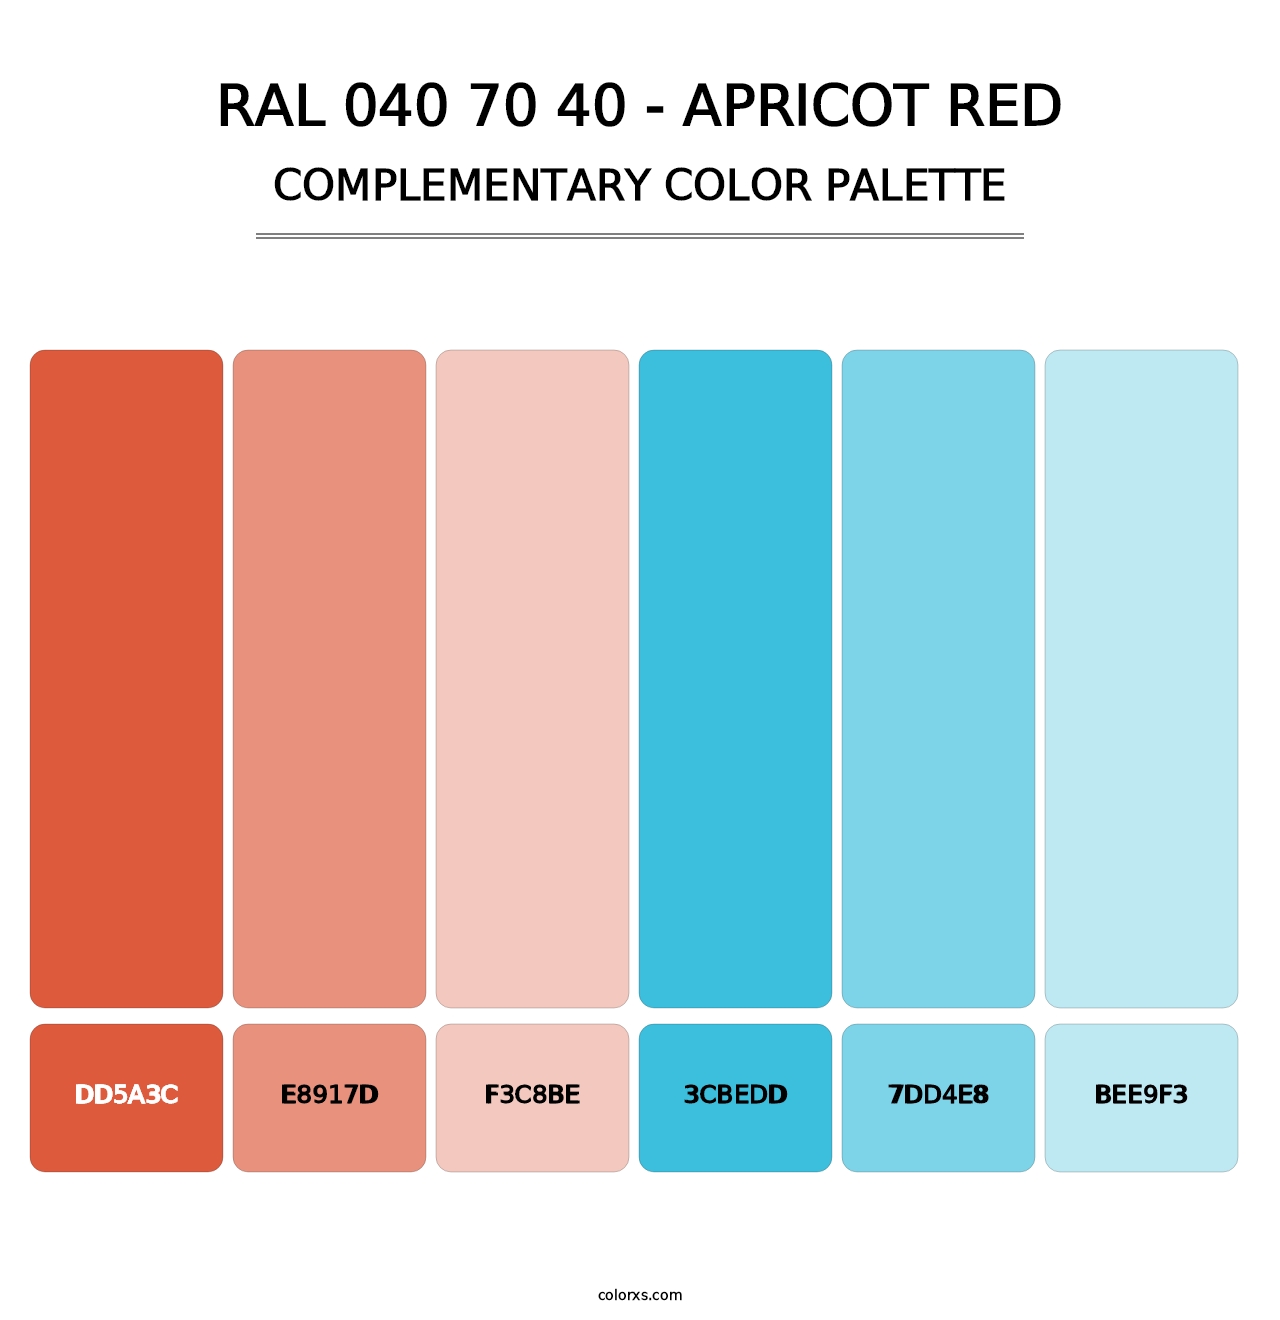 RAL 040 70 40 - Apricot Red - Complementary Color Palette